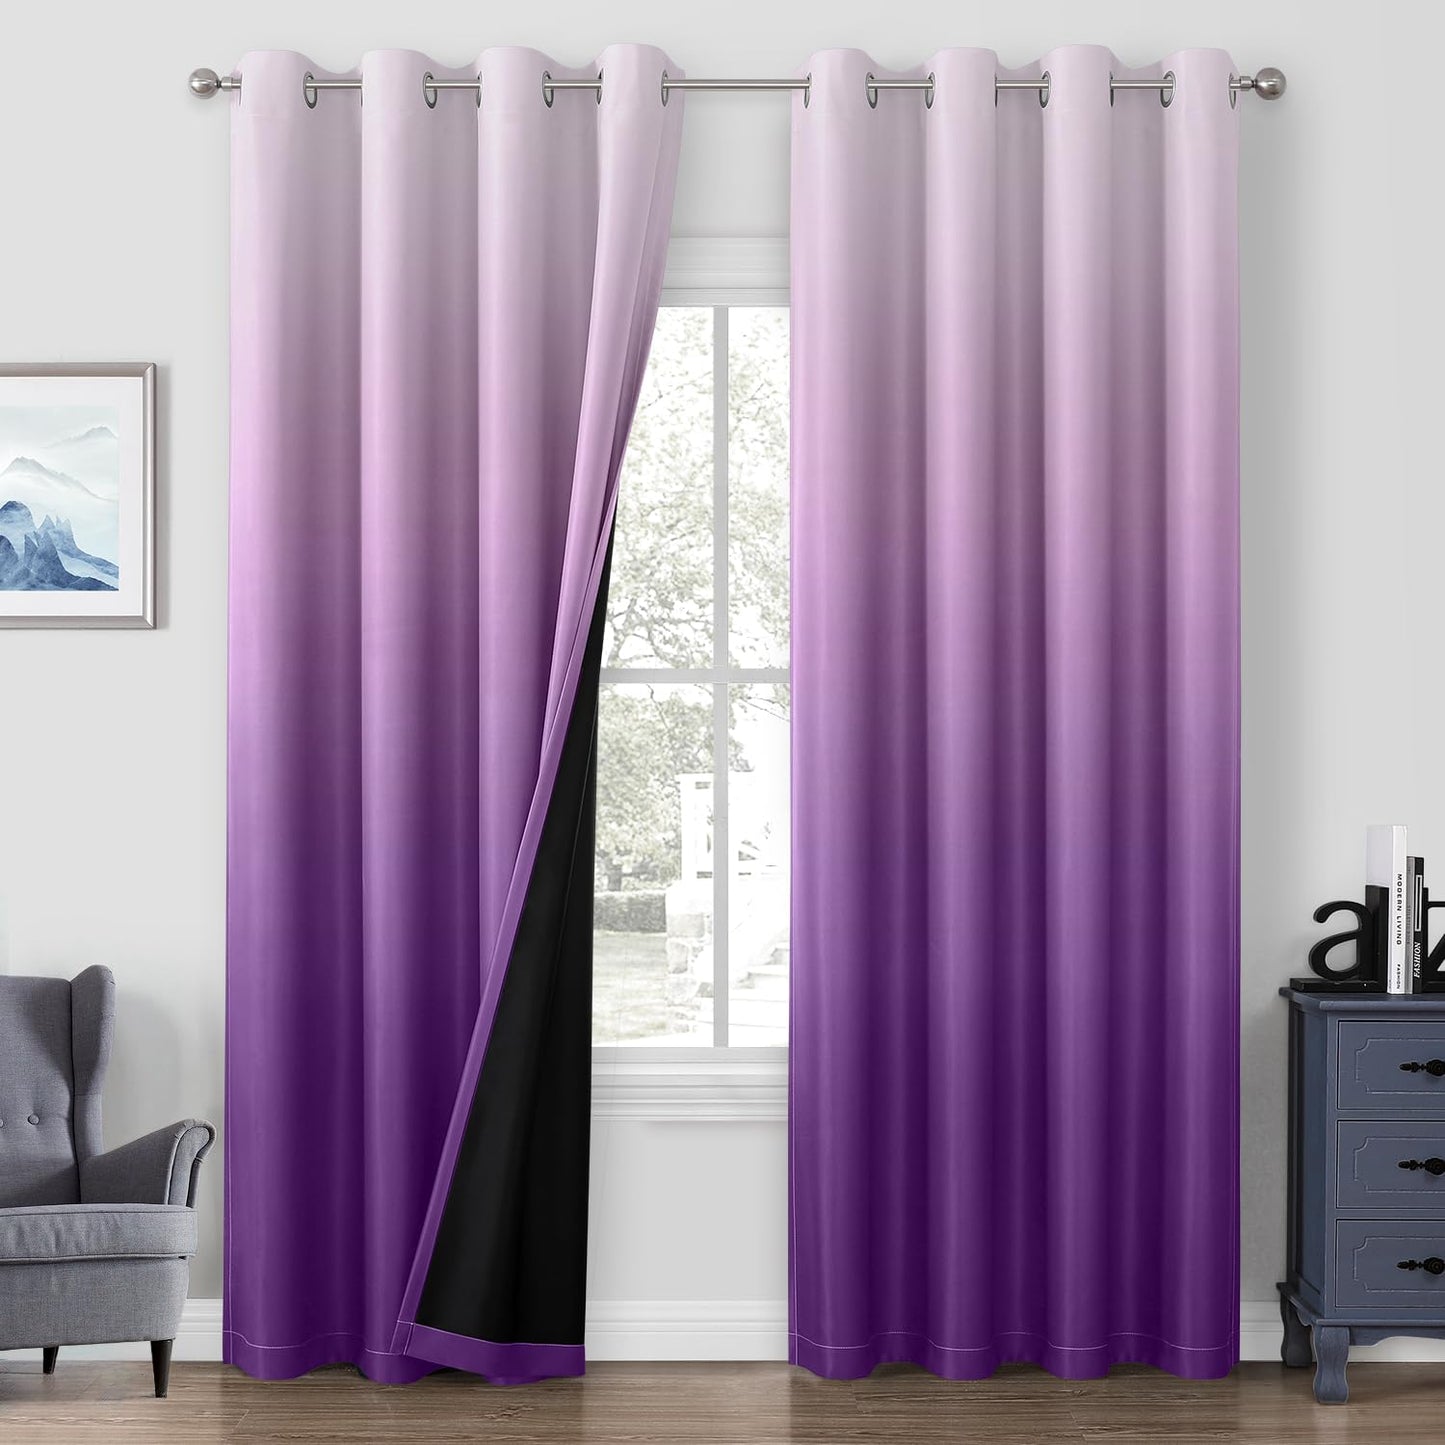 HOMEIDEAS 100% Black Ombre Blackout Curtains for Bedroom, Room Darkening Curtains 52 X 84 Inches Long Grommet Gradient Drapes, Light Blocking Thermal Insulated Curtains for Living Room, 2 Panels  HOMEIDEAS Purple 2 Panel-52" X 96" 